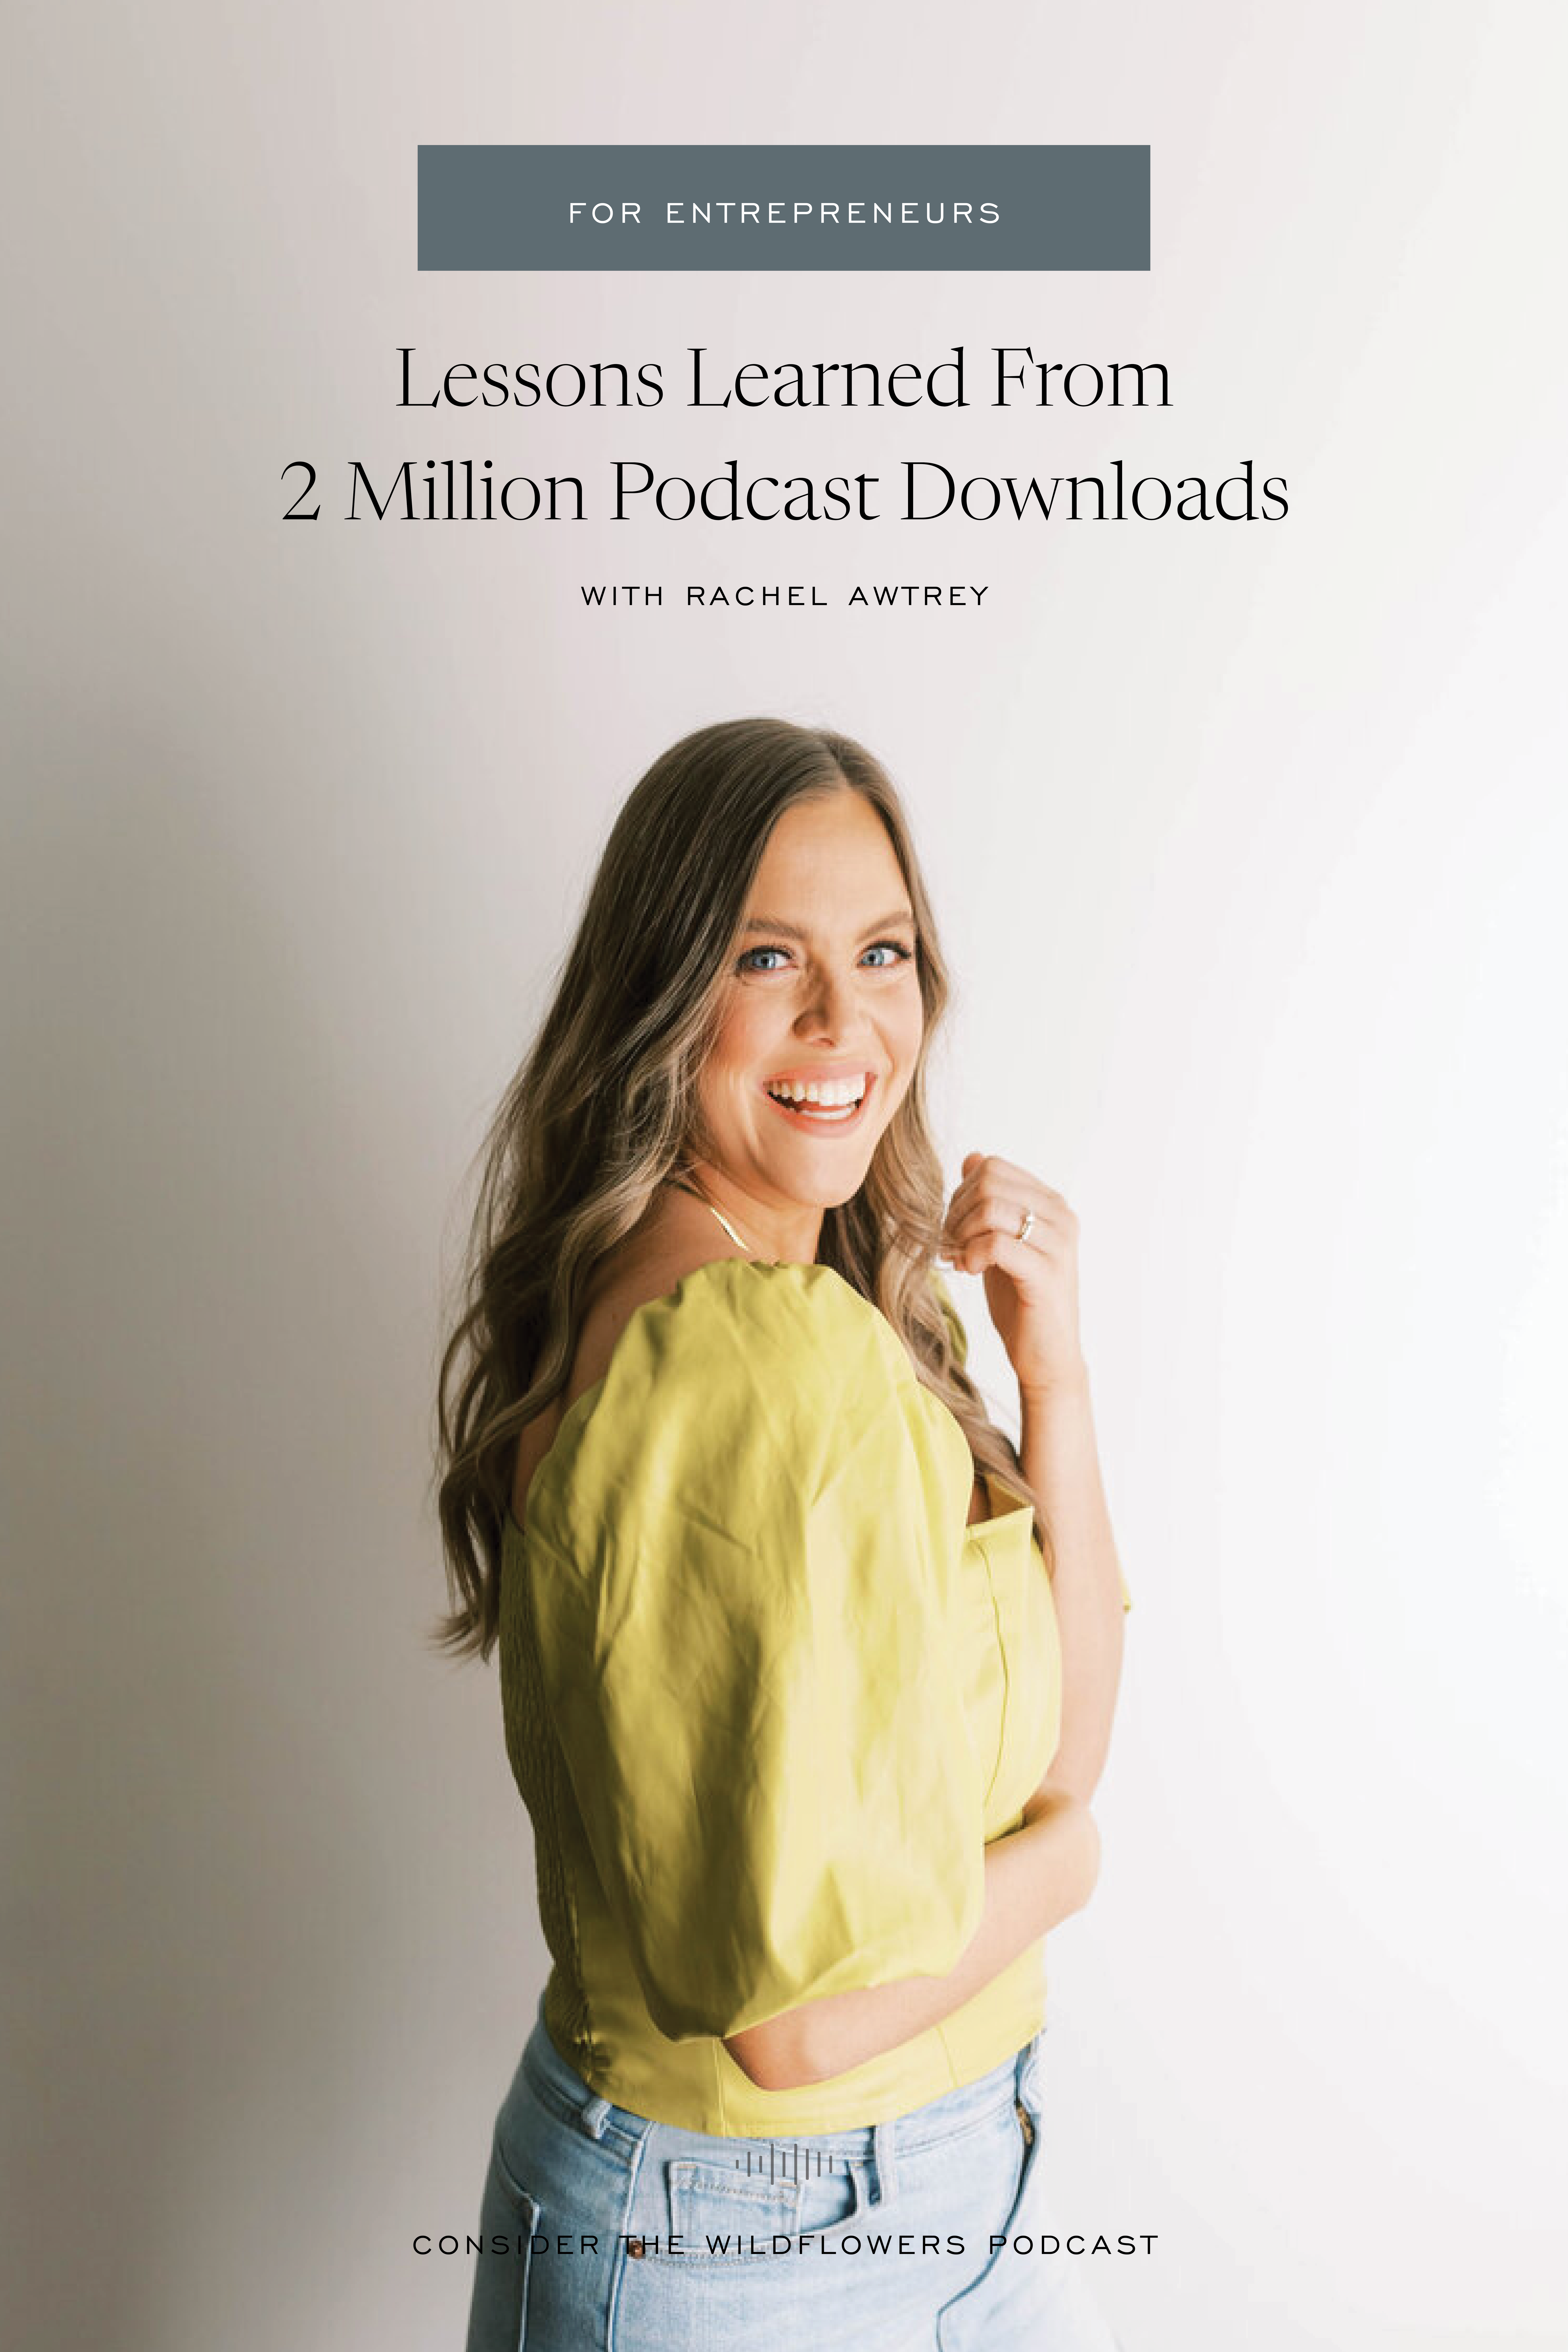 Photo of Rachel Awtrey with caption: Lessons Learned from 2 Million Podcast Downloads